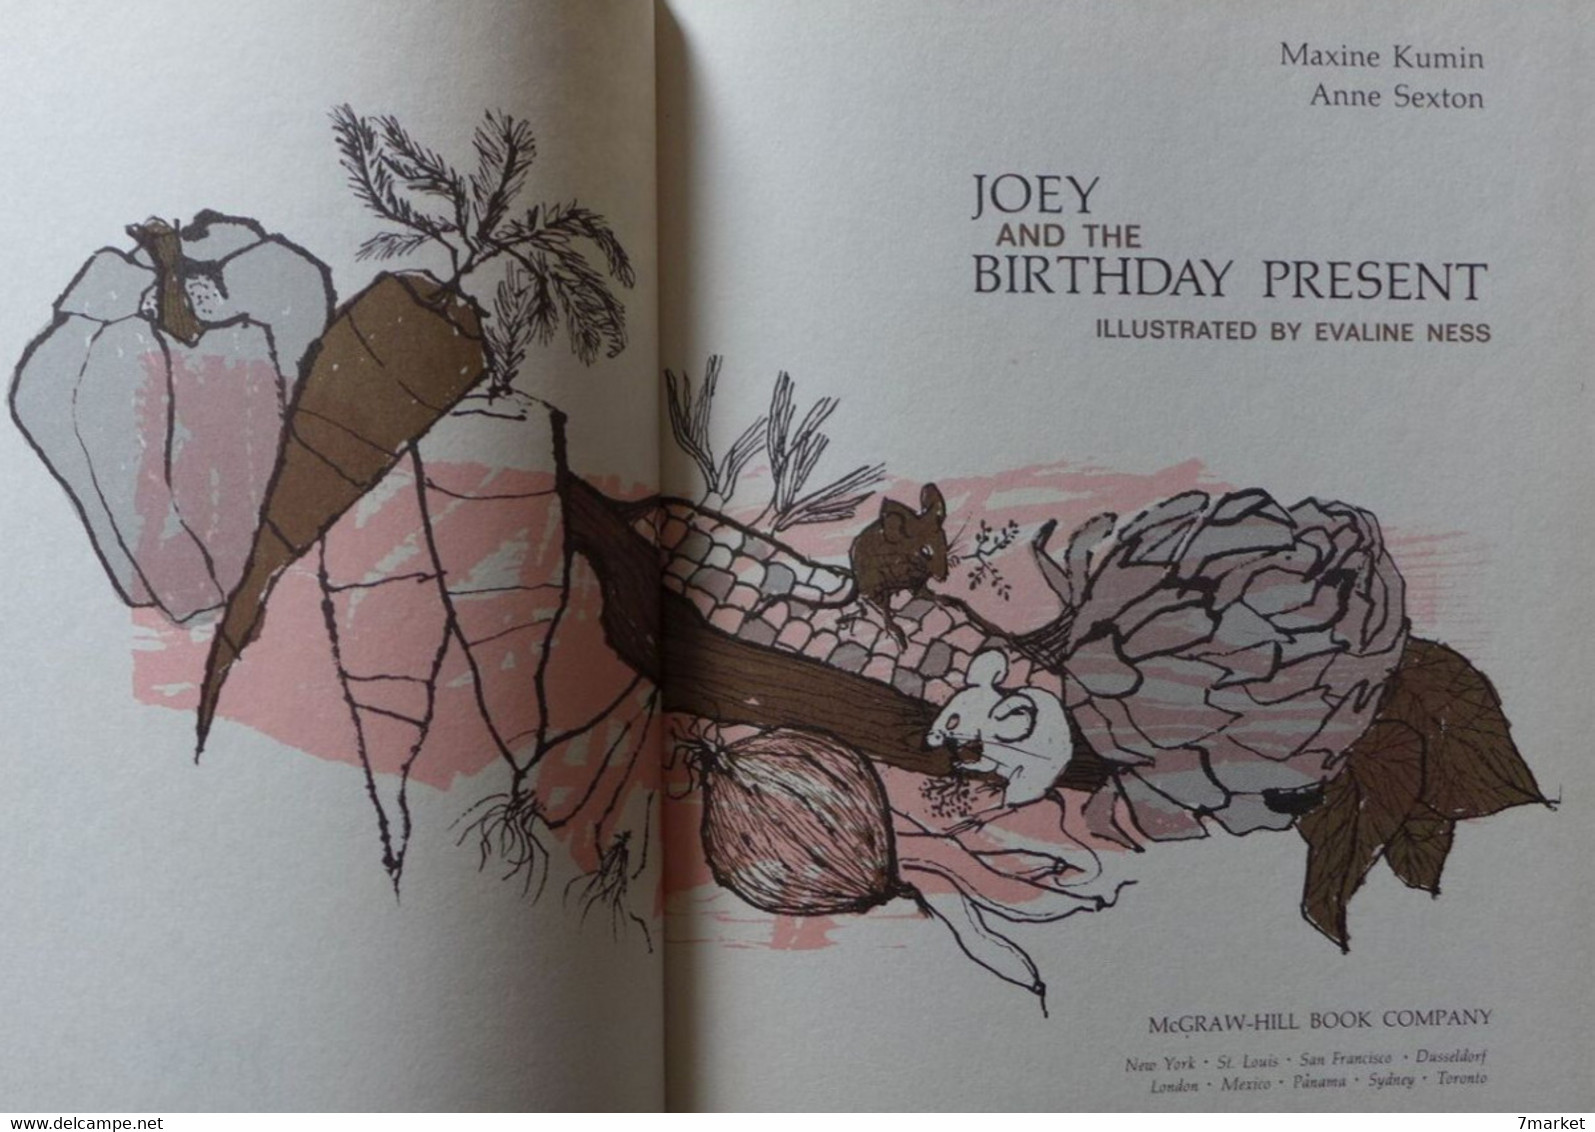 Maxime Kumin & Anne Sexton - Joey And The Birthday Present - Fiction